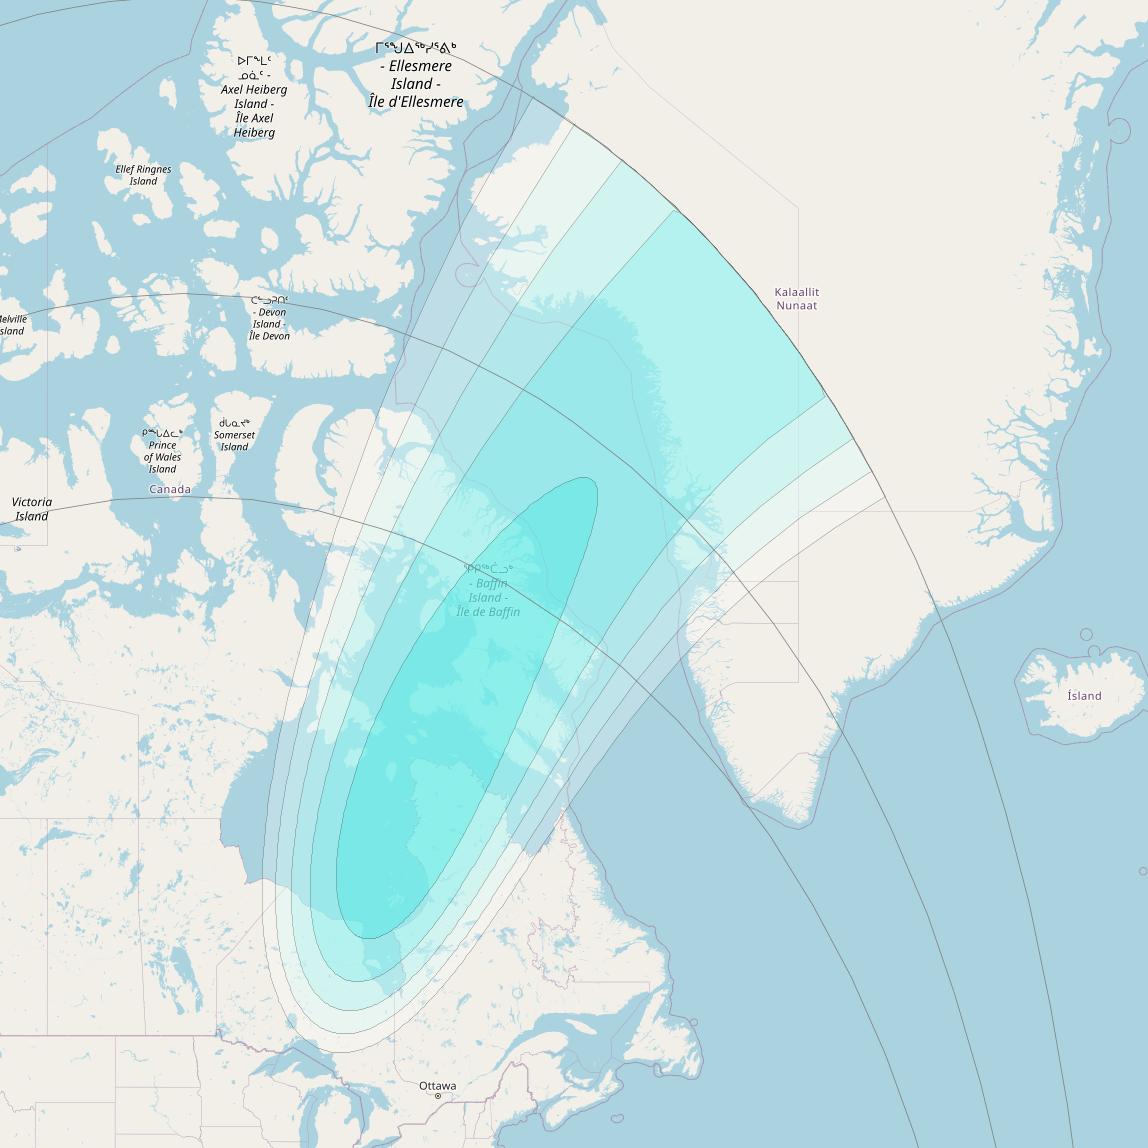 Inmarsat-4F3 at 98° W downlink L-band S125 User Spot beam coverage map